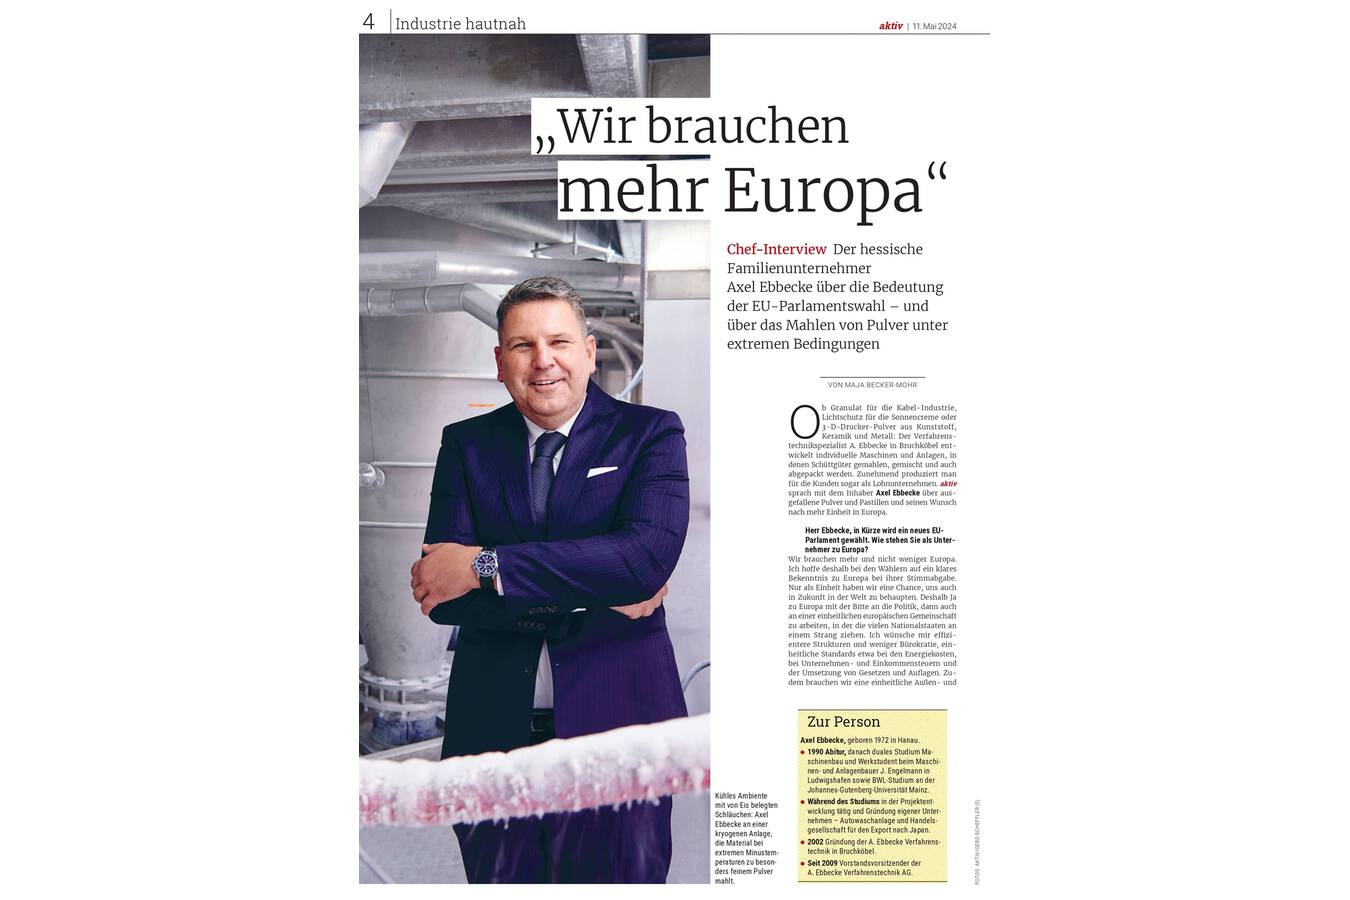 Interview with the Hessian family entrepreneur Axel Ebbecke Owner Axel Ebbecke on the significance of the EU parliamentary elections and on grinding powder under extreme conditions by process technology specialist A. Ebbecke in Bruchköbel.